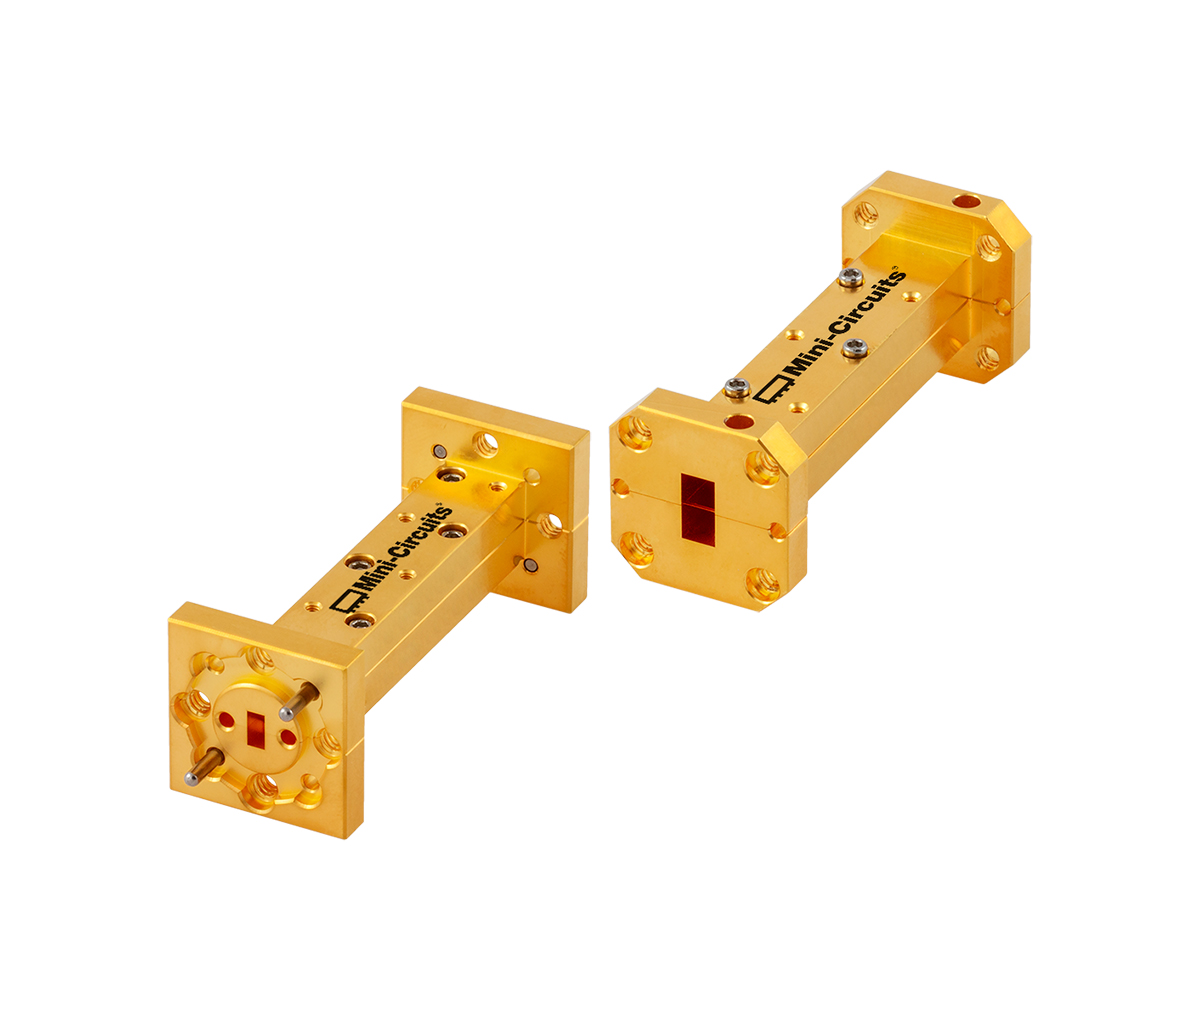 Two waveguide bandpass filters